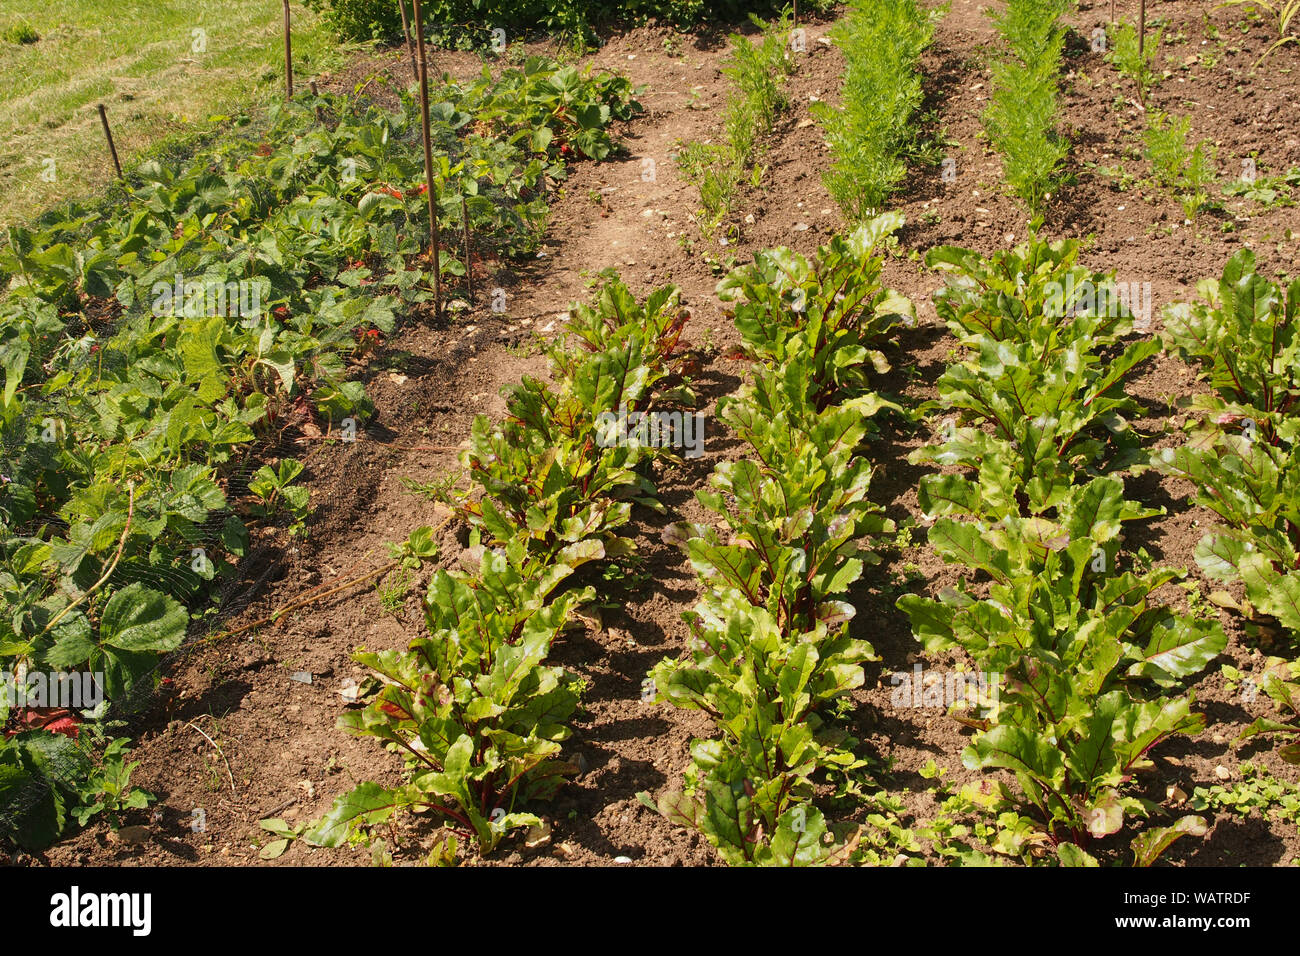 A  low down view of rows of young beetroot and carrot plants next to netted strawberry plants on an allotment plot at the end of June. Stock Photo